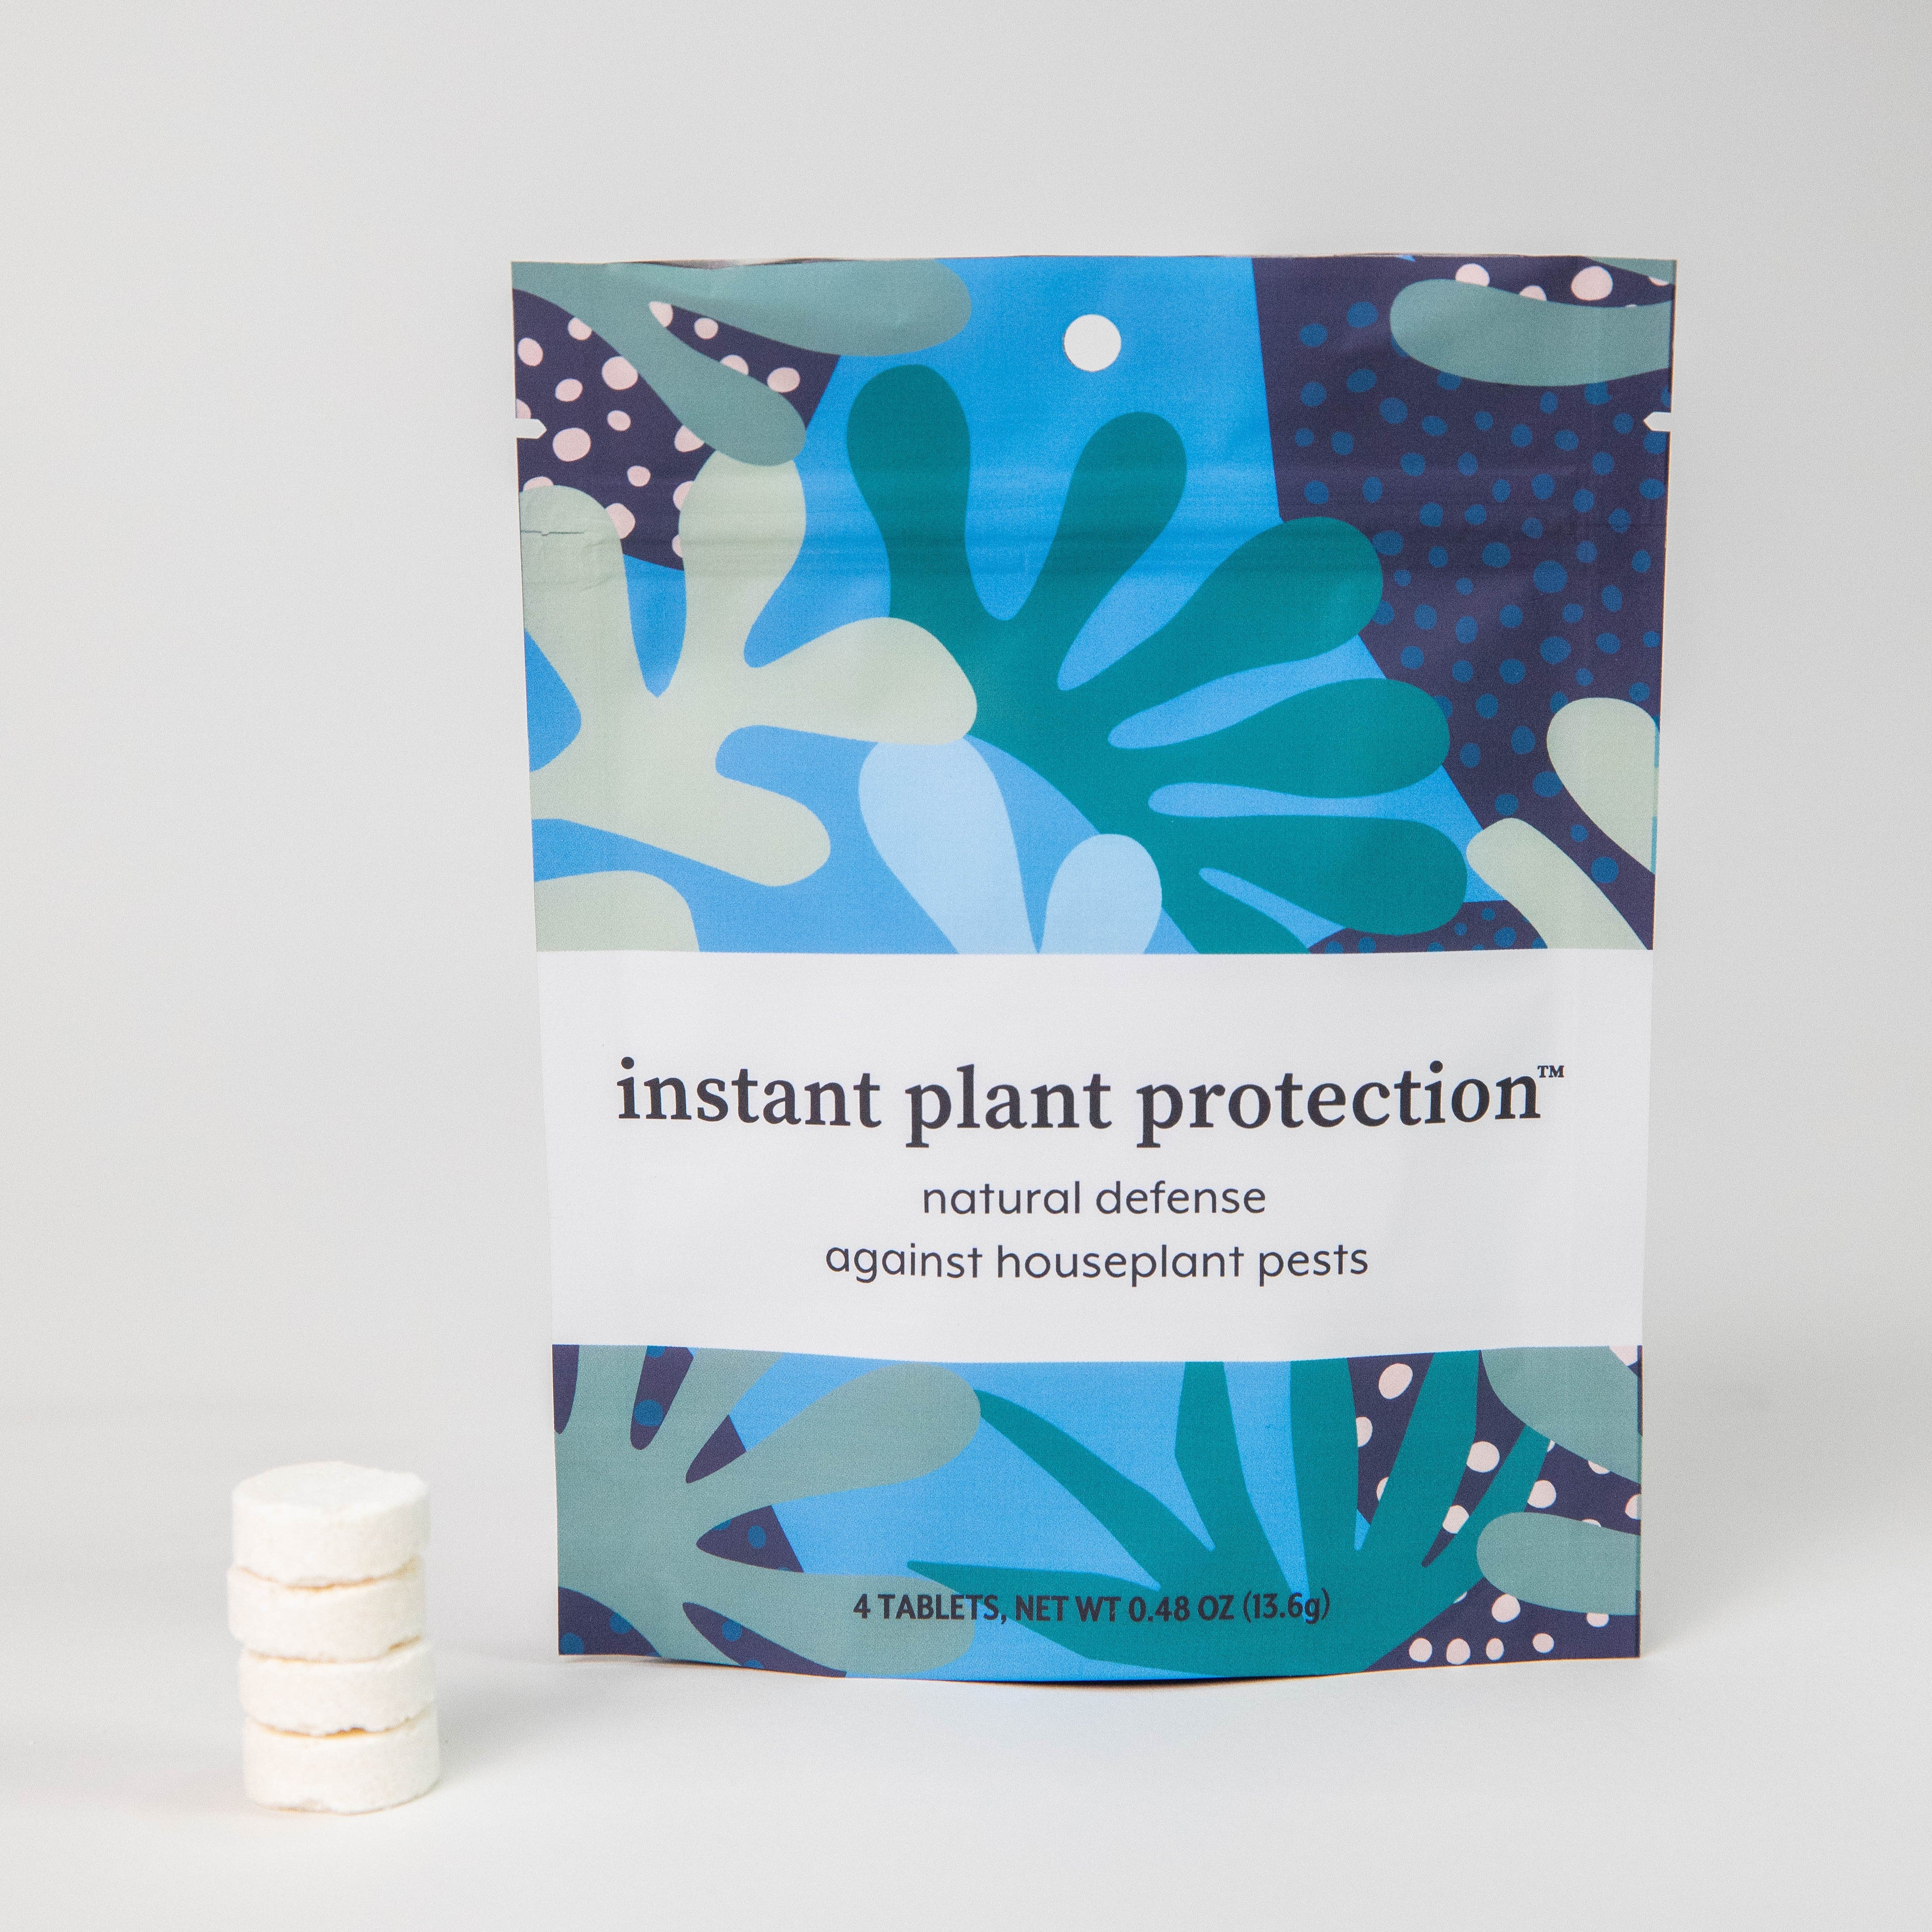 Instant Plant Protection package of (4) tablets for make-at-home indoor plant pest control.